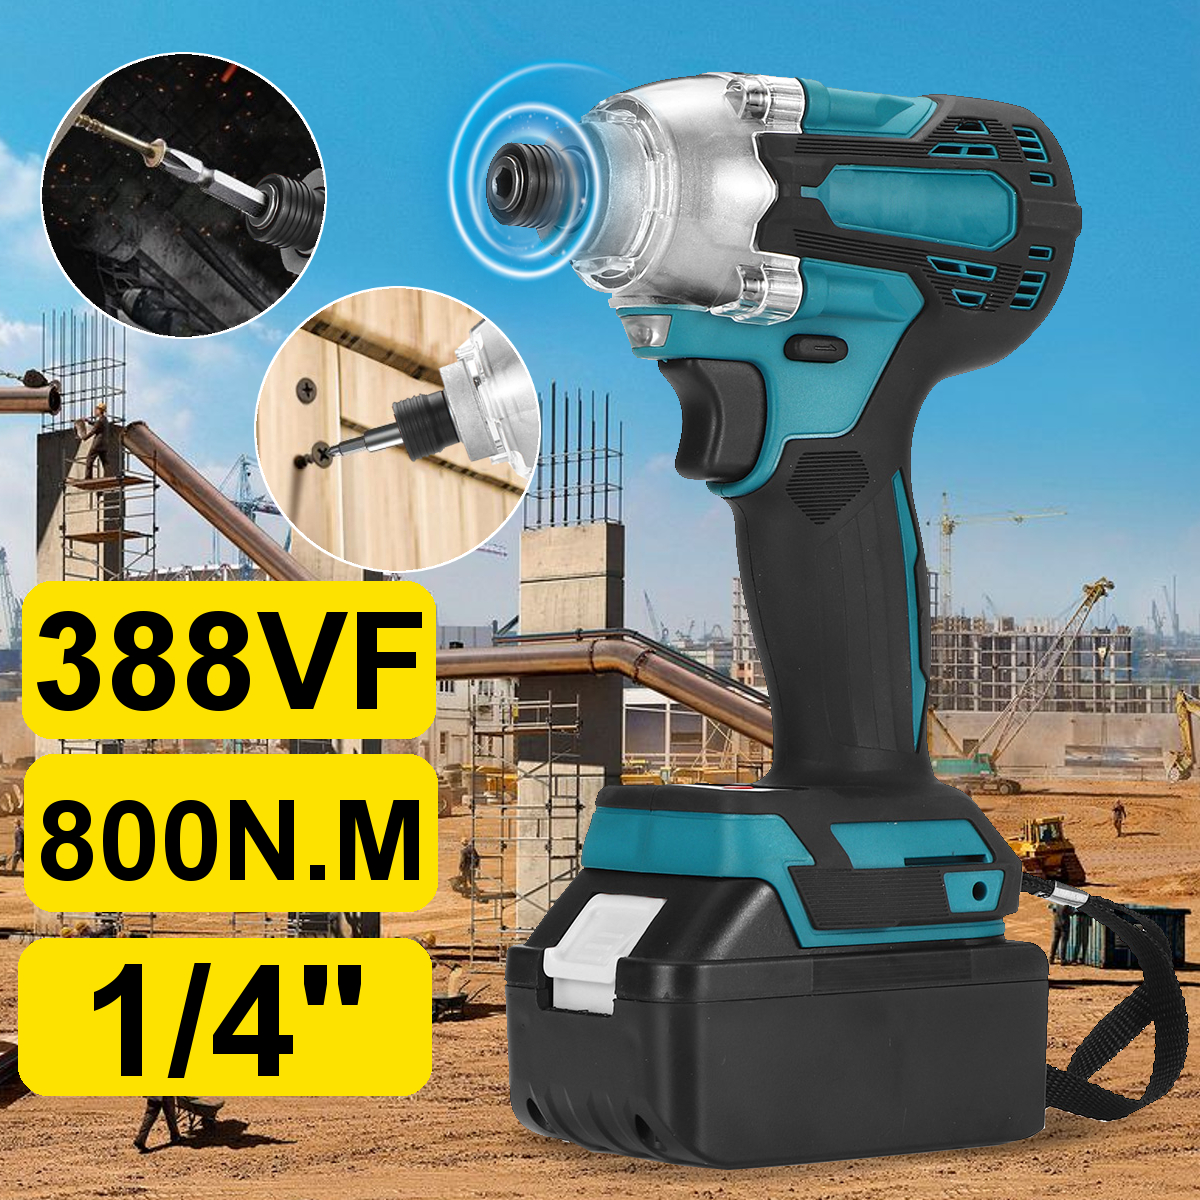 18V-14-inch-Brushless-Cordless-Electric-Screwdriver-Driver-Rechargeable-W-Battery-1790859-2